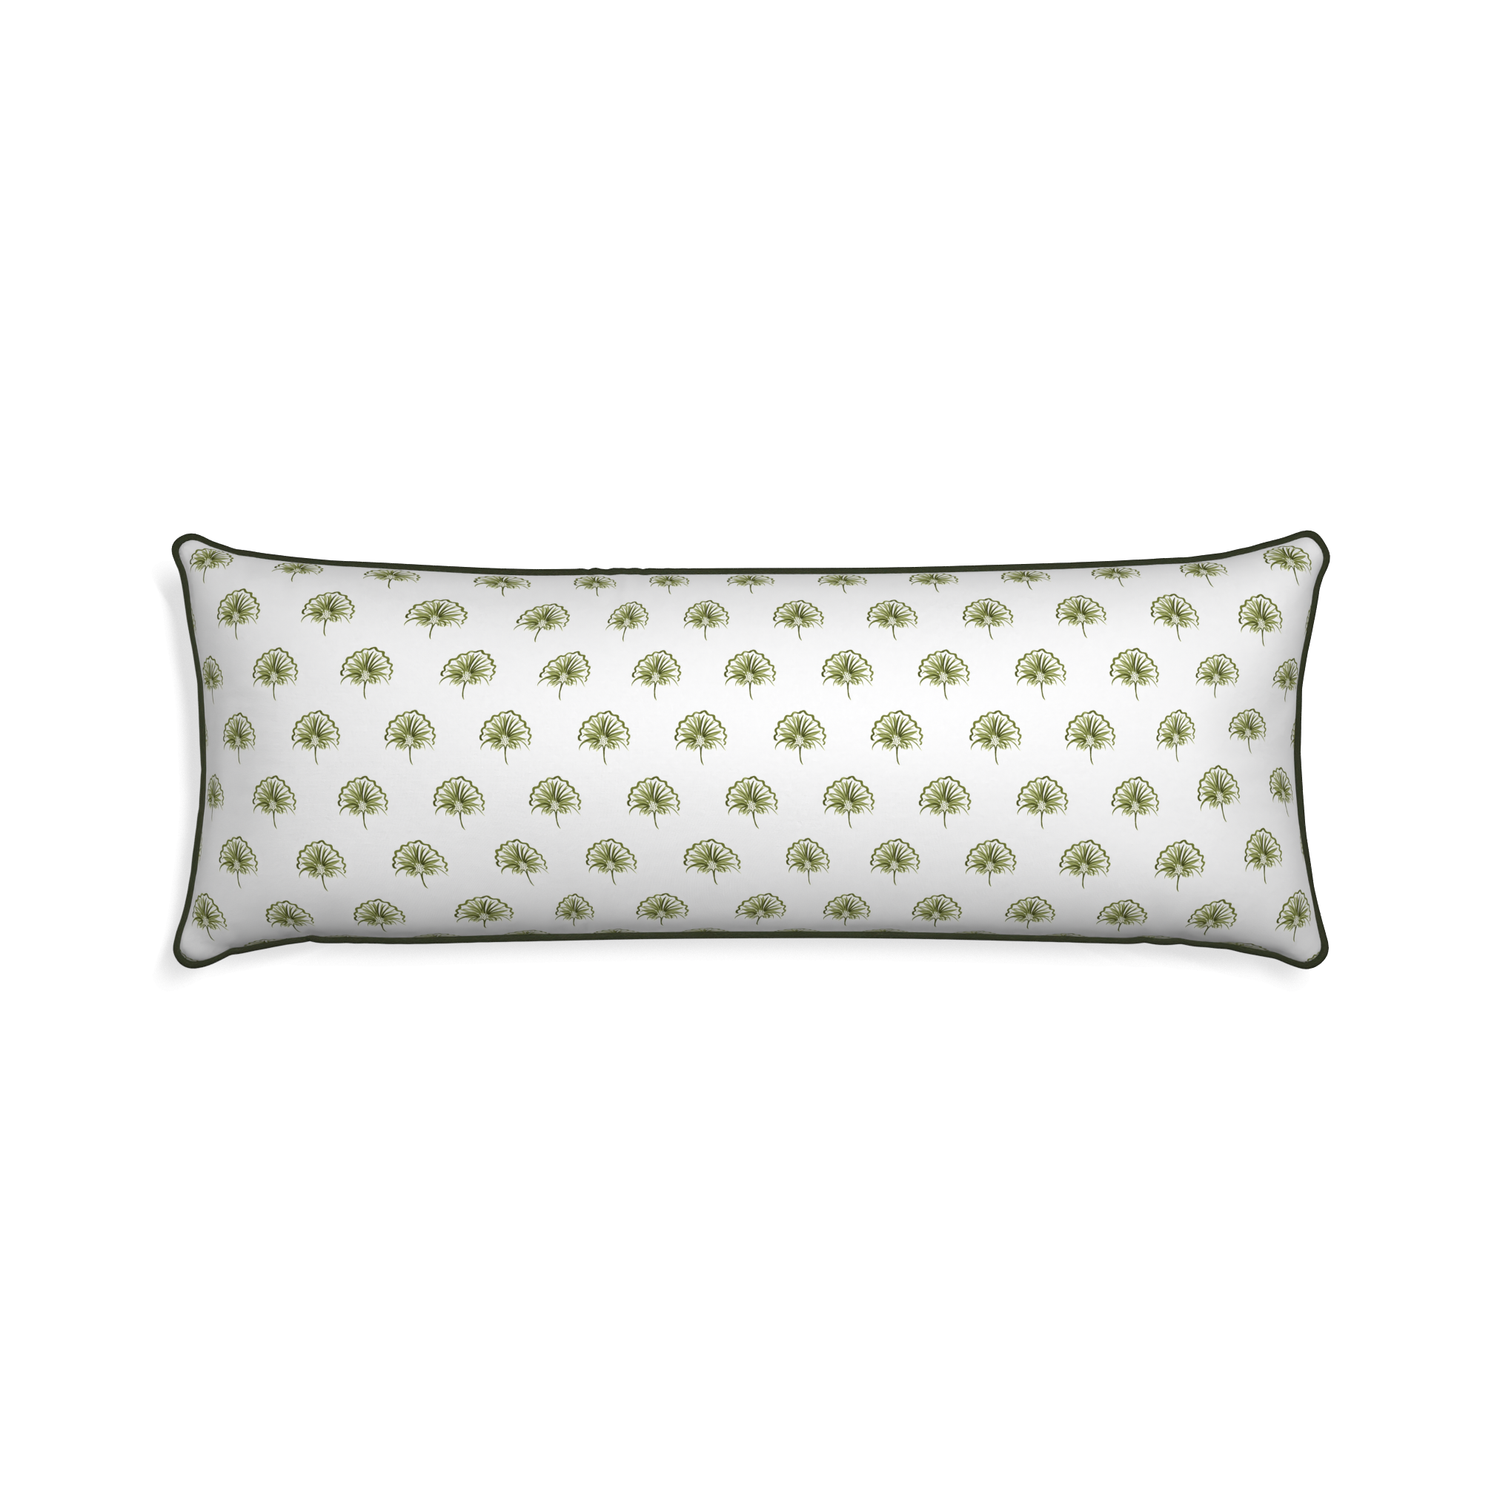 Xl-lumbar penelope moss custom green floralpillow with f piping on white background